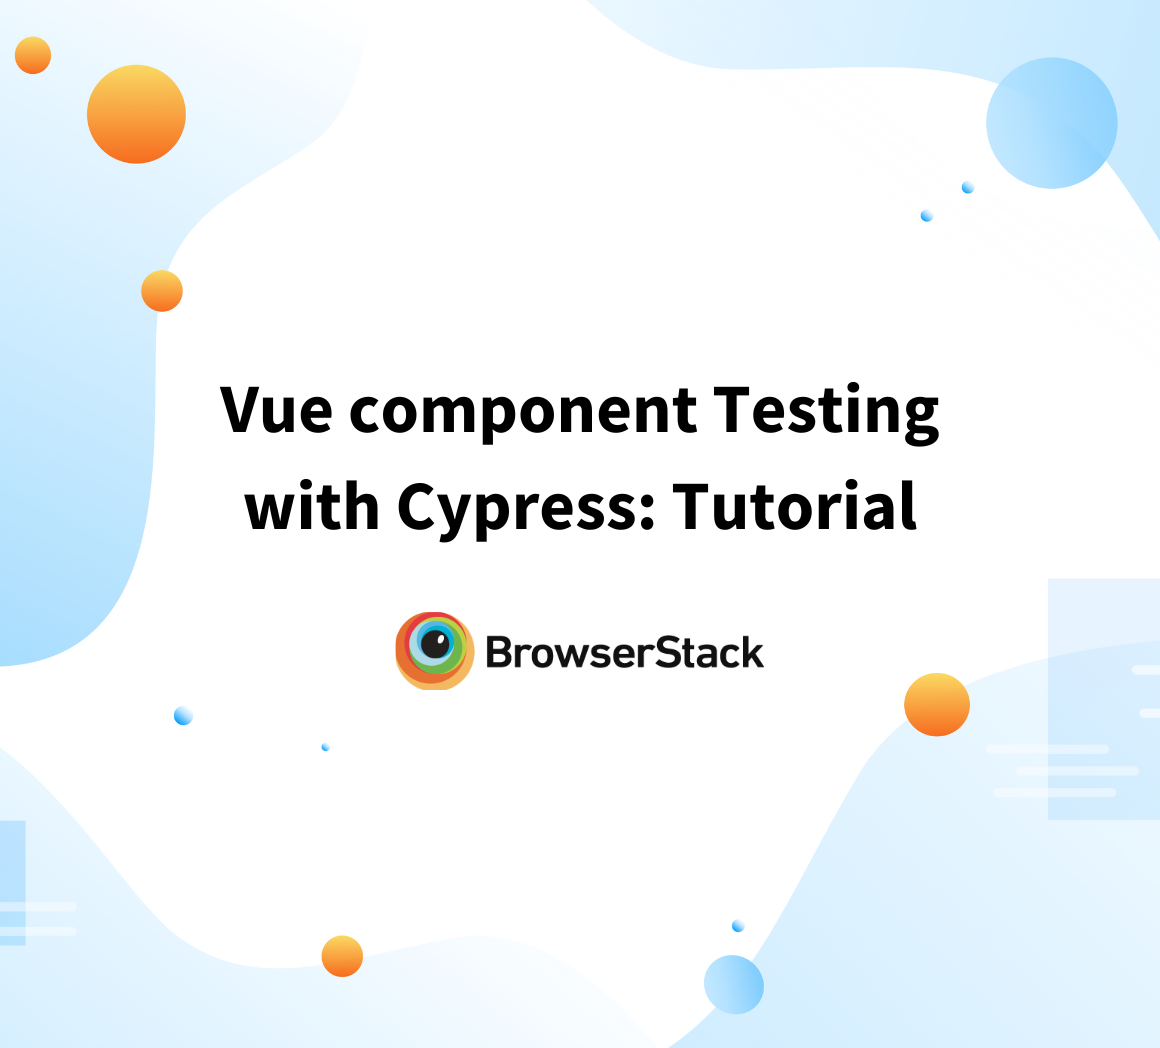 Vue component Testing with Cypress: Tutorial